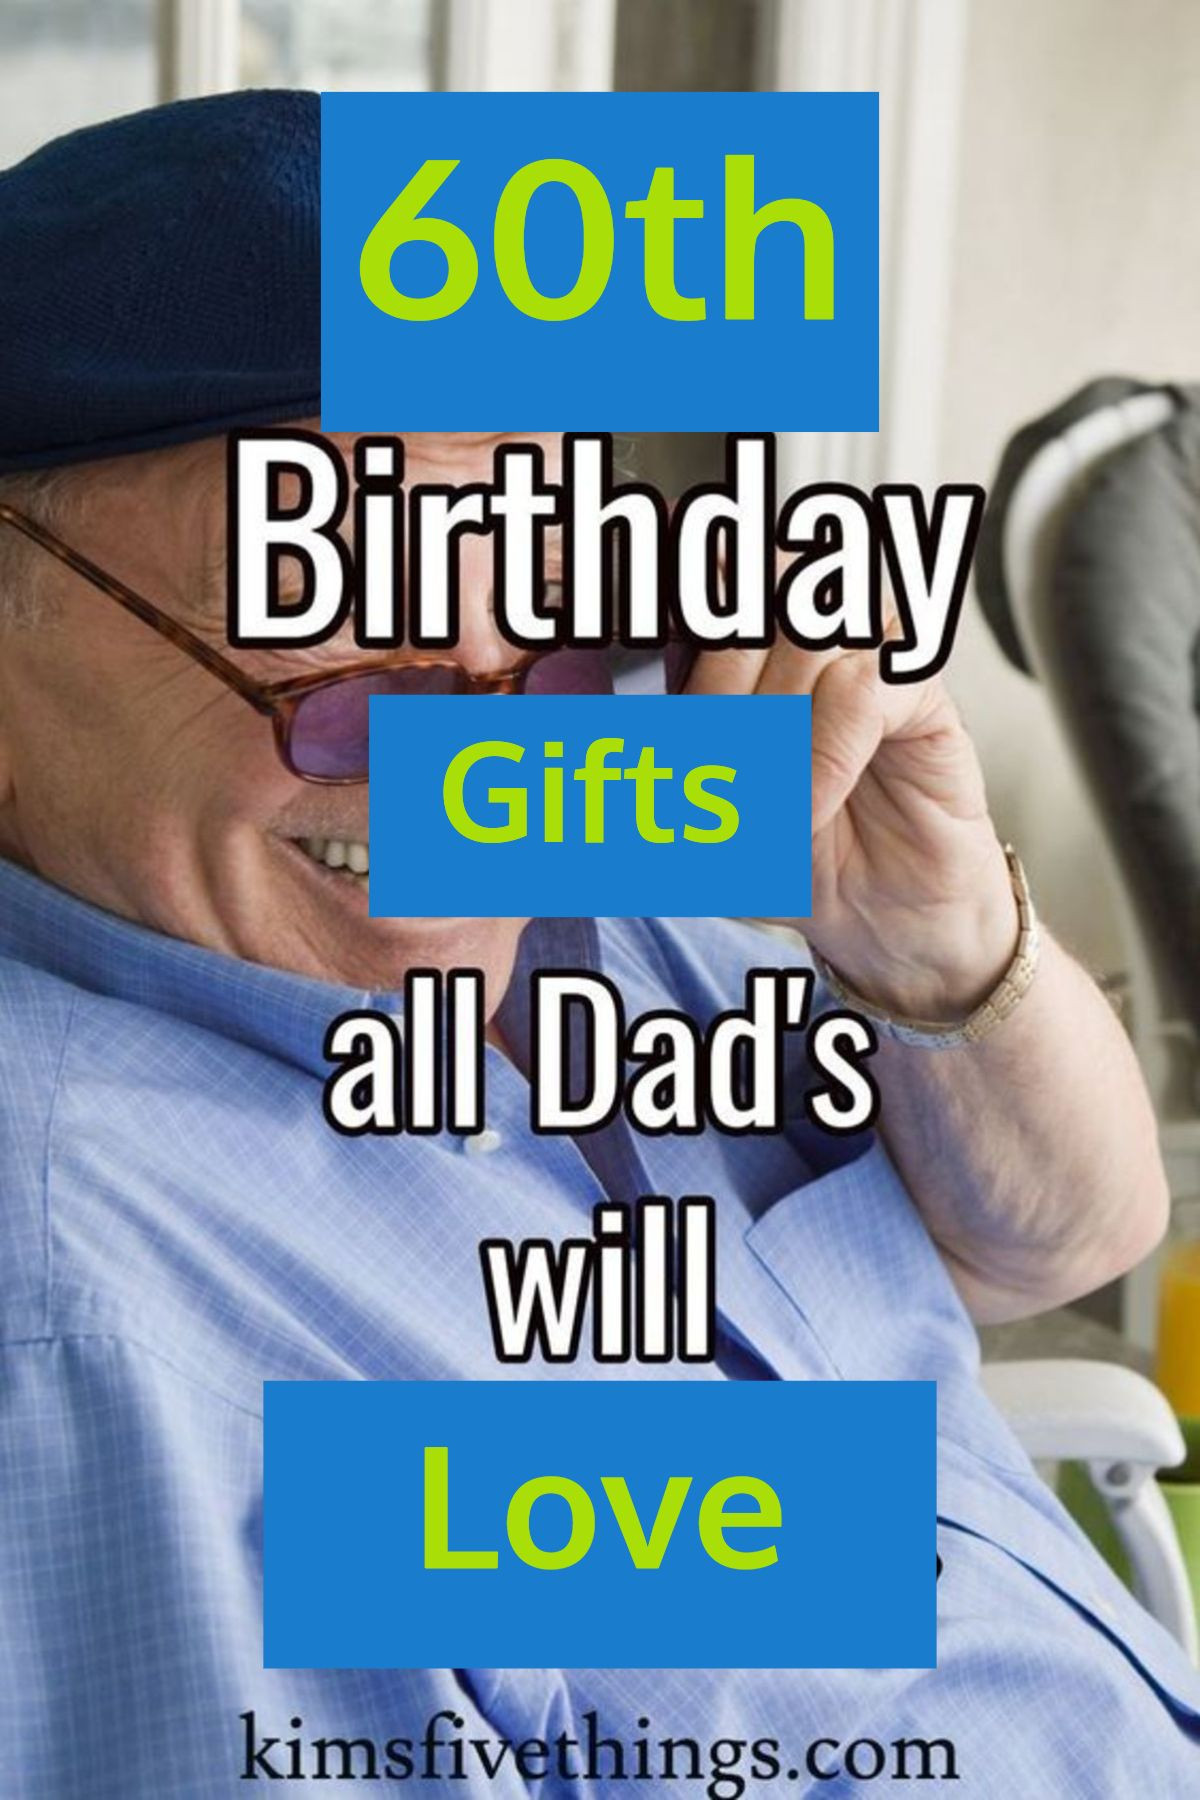 60th Birthday Gift Ideas For Dad
 Best 60th Birthday Gift Ideas for Dad